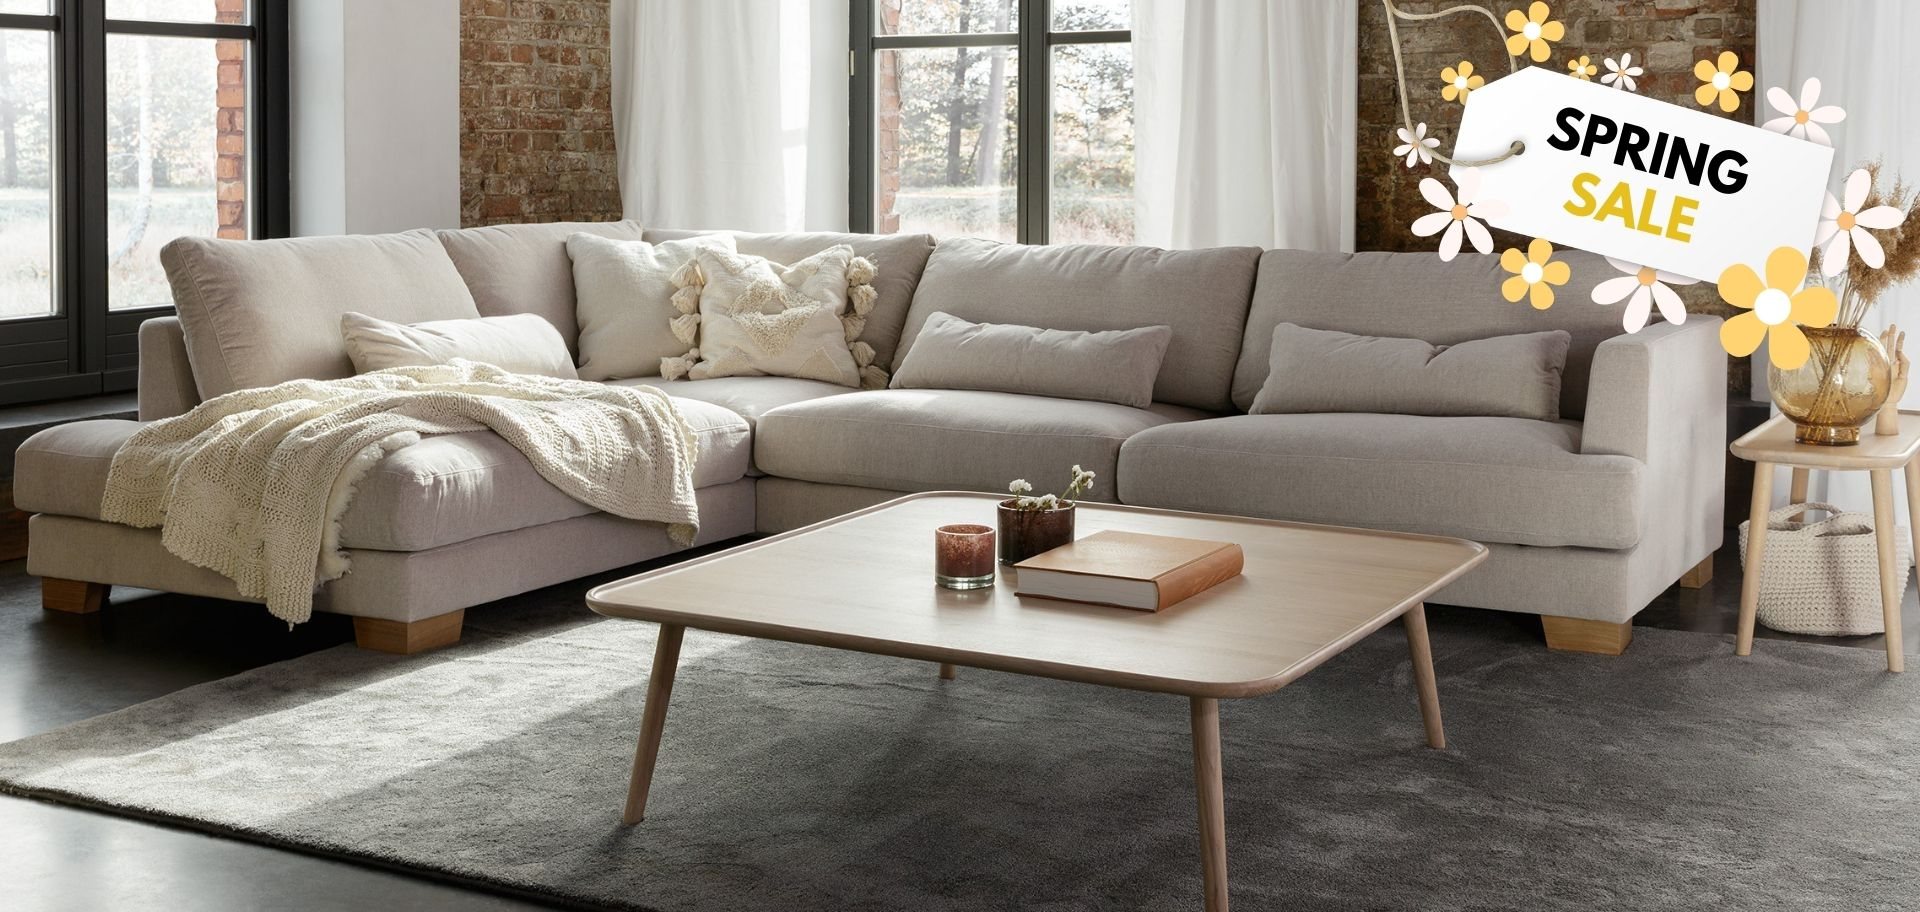 Discover our Superbly Stylish Sofas, Armchairs and Sofa Beds 